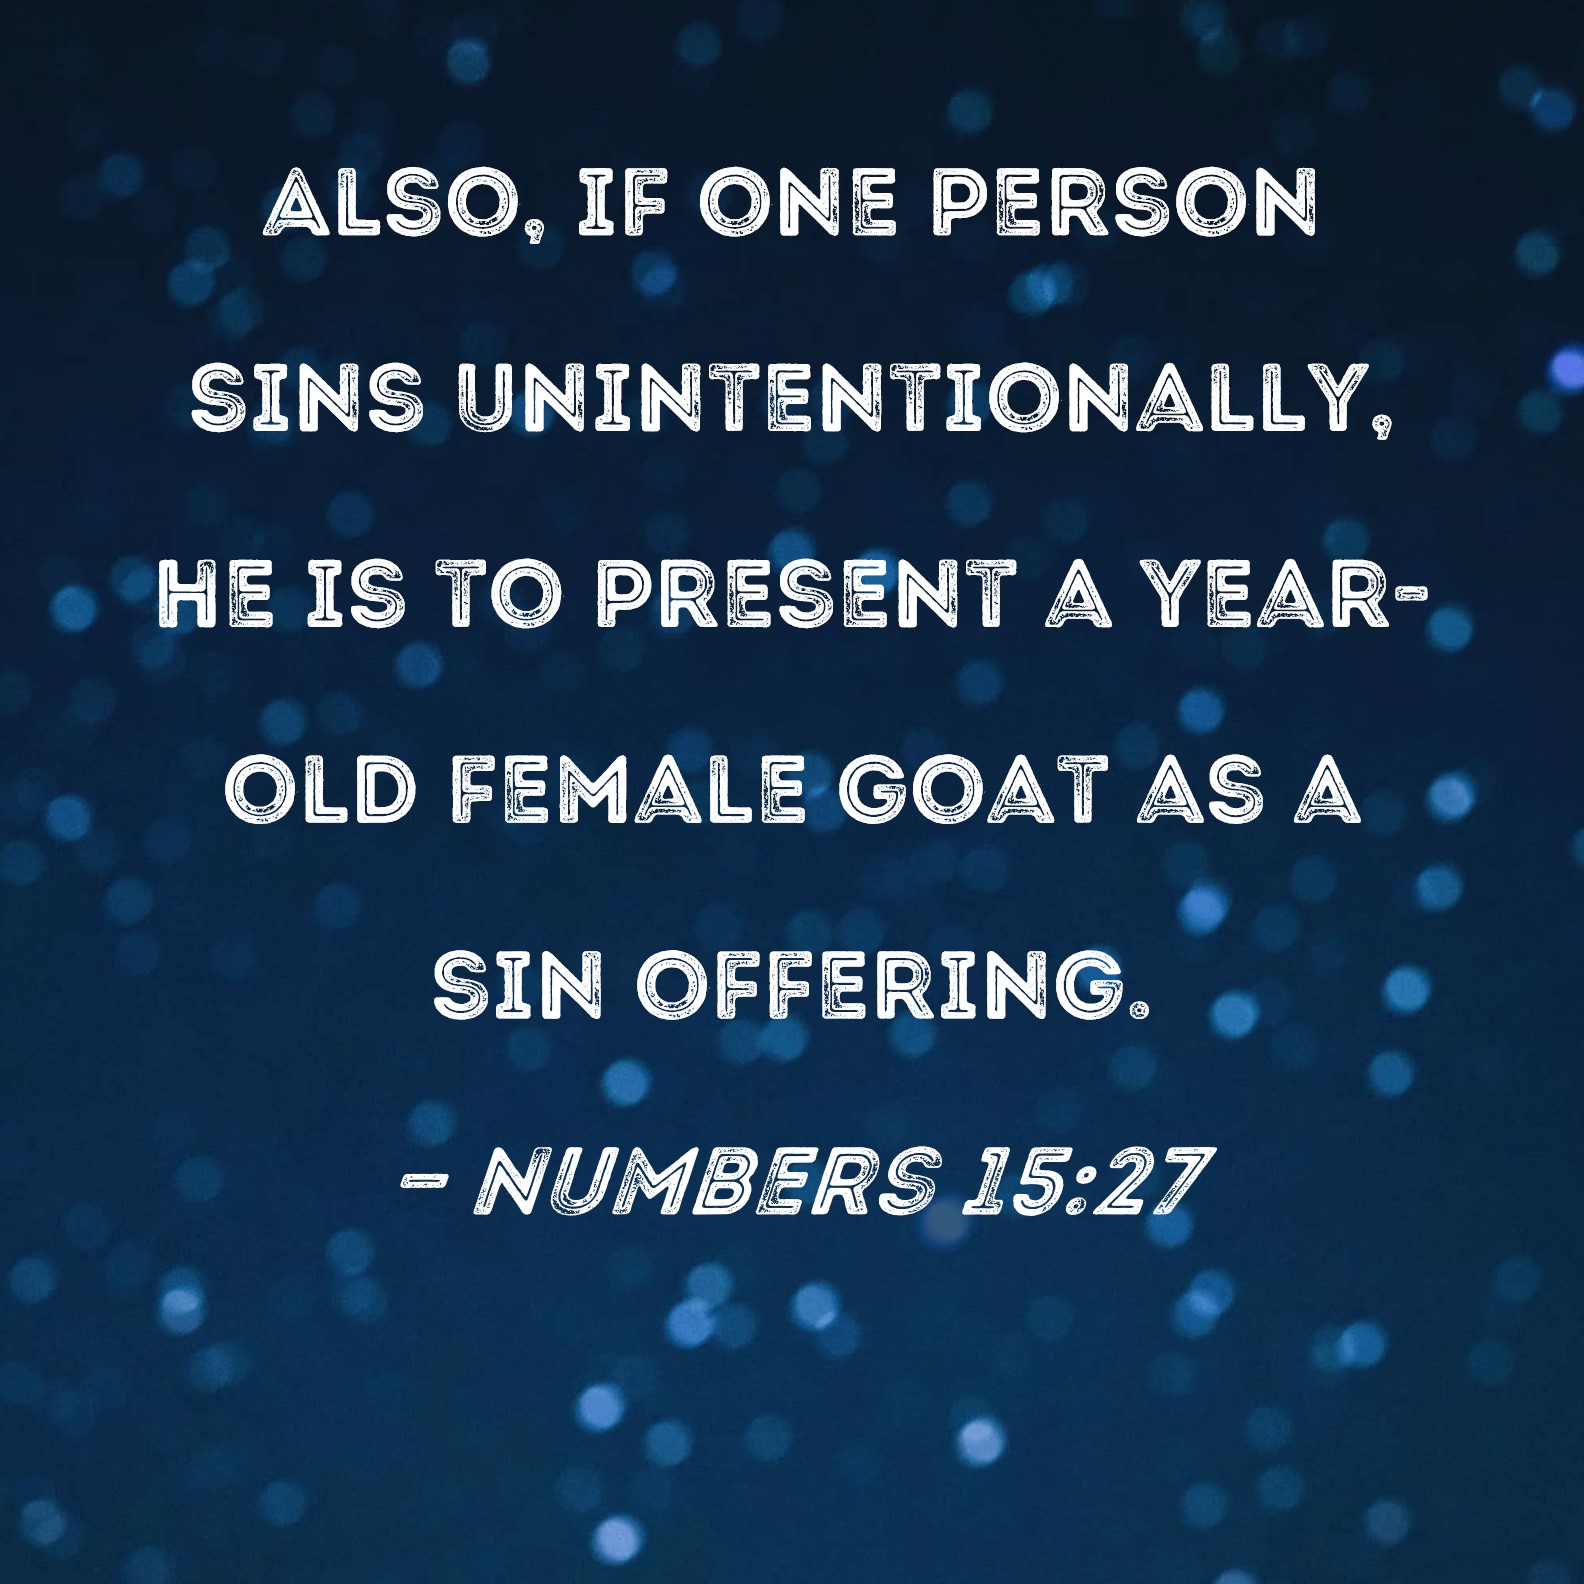 numbers-15-27-also-if-one-person-sins-unintentionally-he-is-to